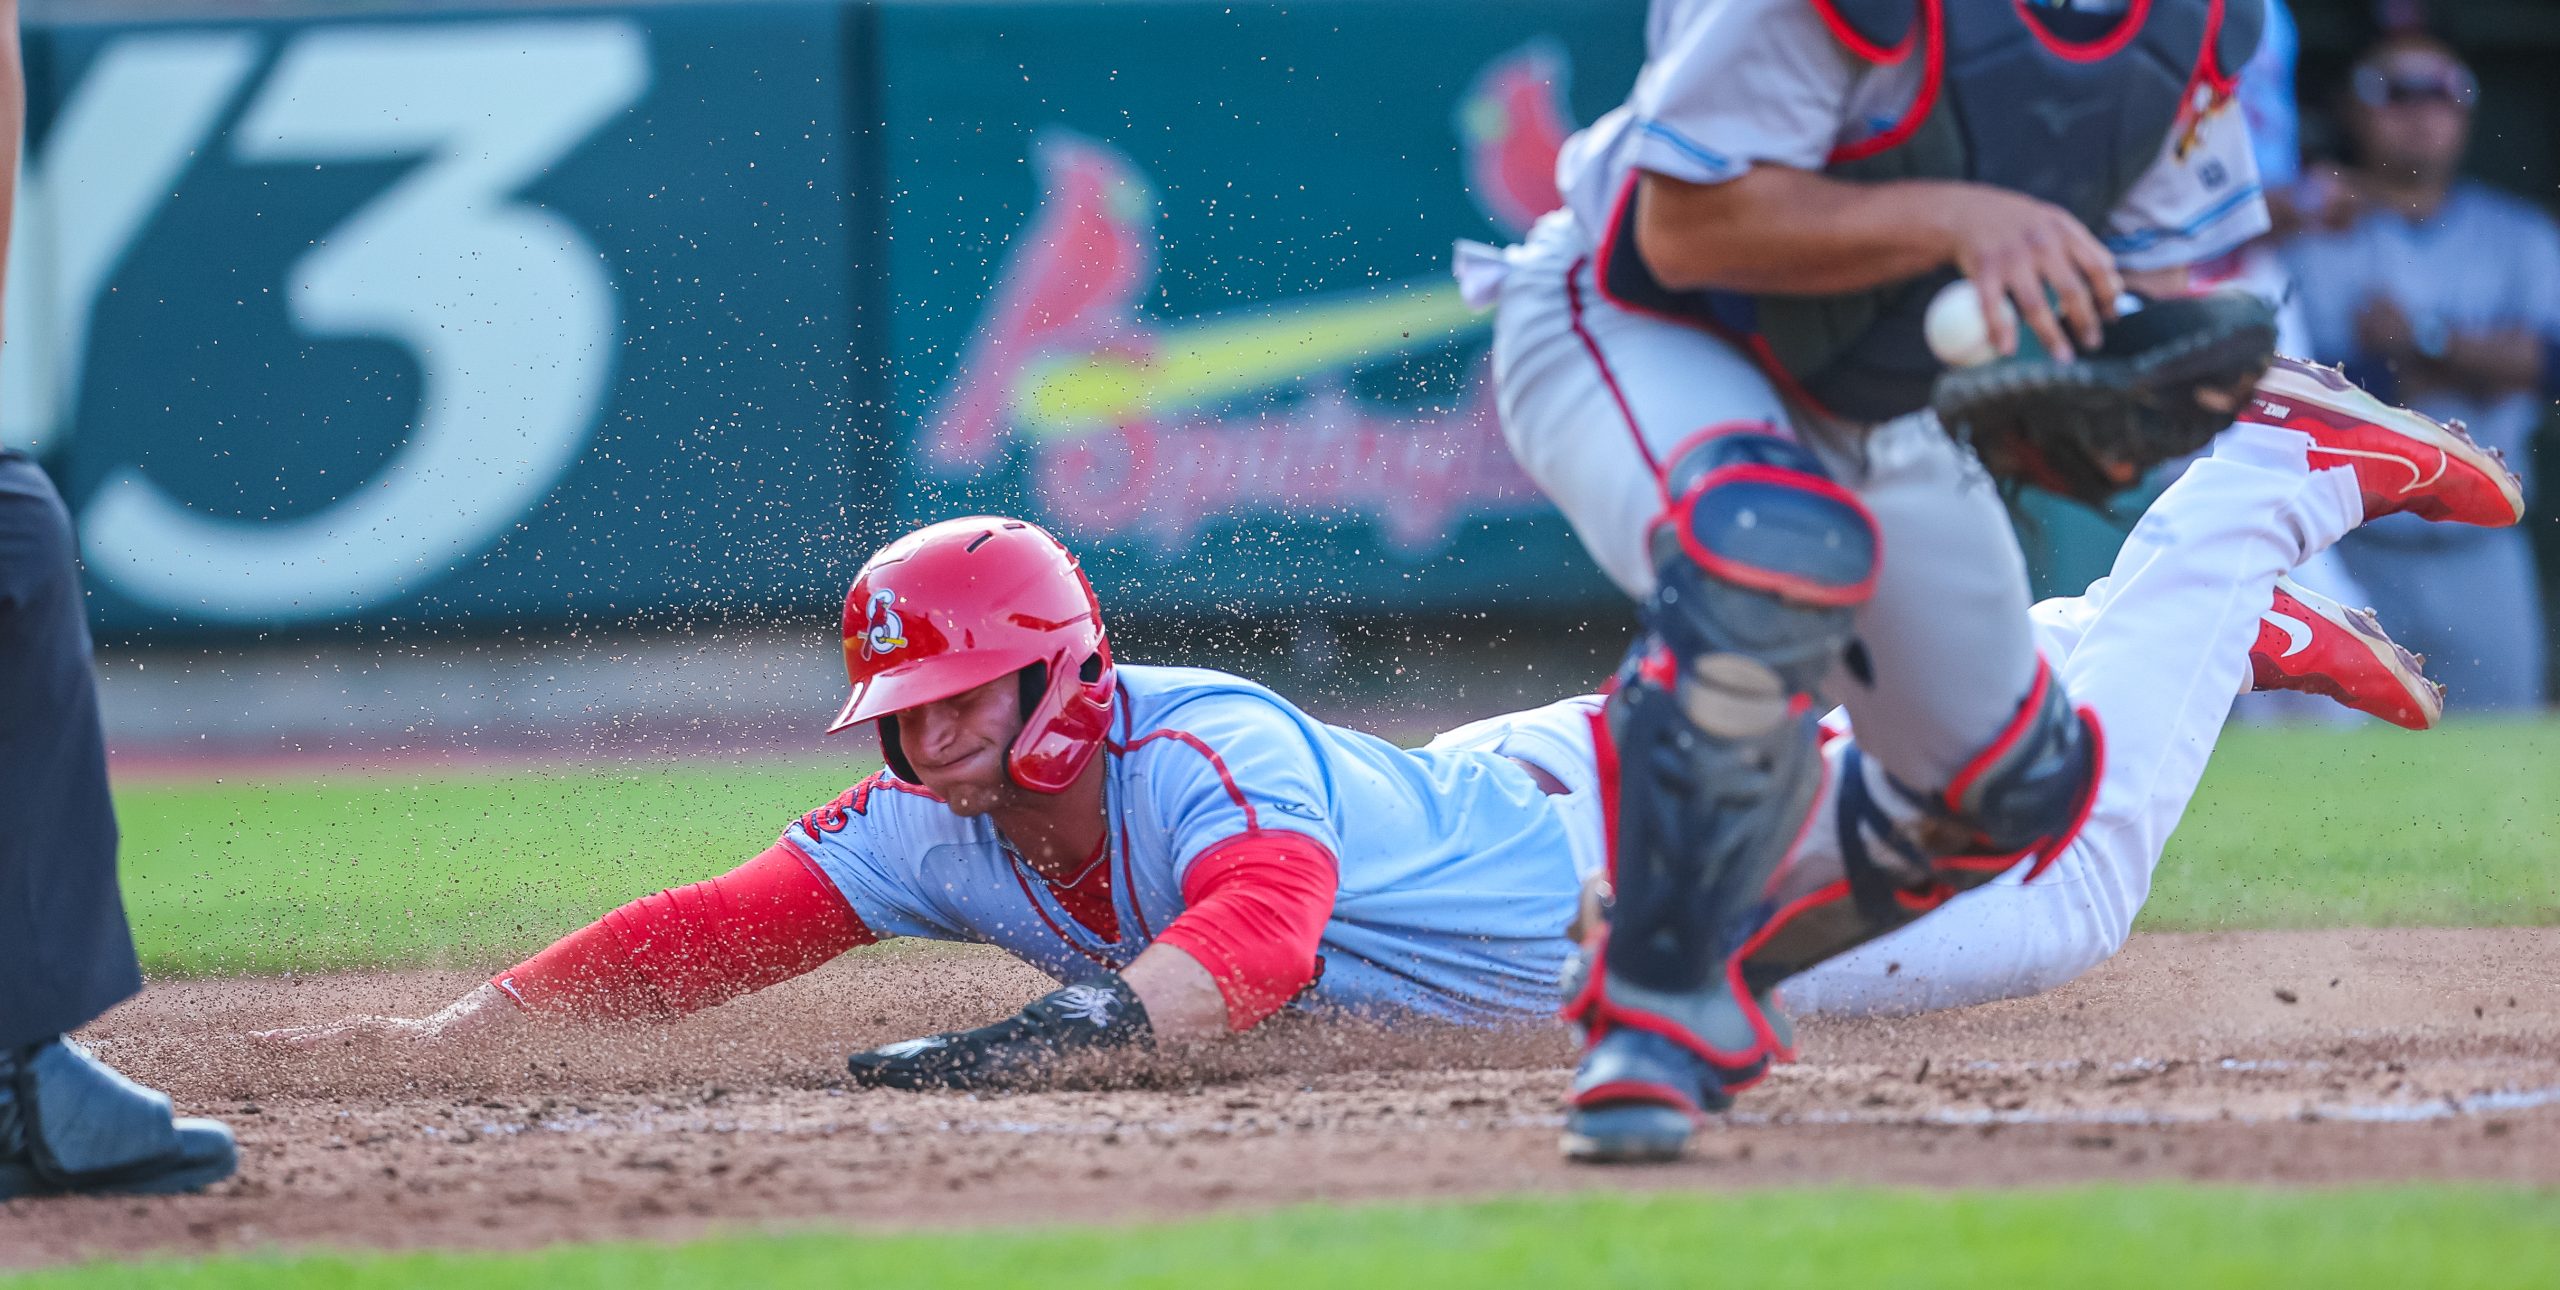 A baseball player in a Springfield Cardinals uniform slides headfirst into home plate